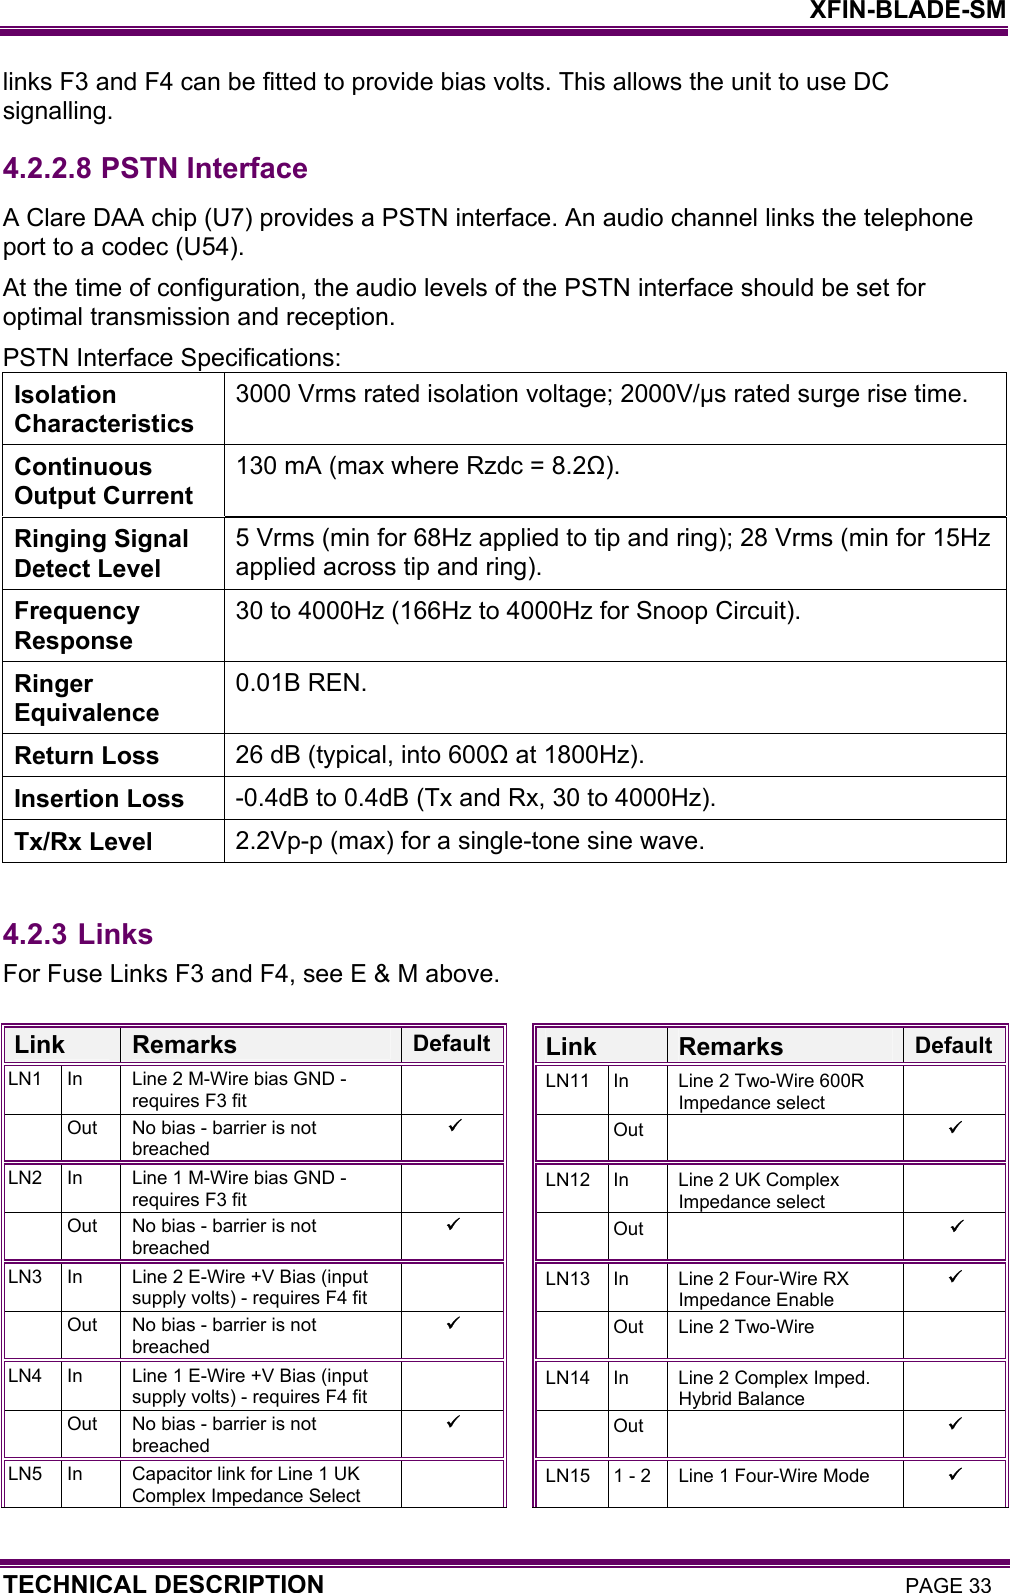    XFIN-BLADE-SM TECHNICAL DESCRIPTION PAGE 33 links F3 and F4 can be fitted to provide bias volts. This allows the unit to use DC signalling. 4.2.2.8  PSTN Interface A Clare DAA chip (U7) provides a PSTN interface. An audio channel links the telephone port to a codec (U54). At the time of configuration, the audio levels of the PSTN interface should be set for optimal transmission and reception. PSTN Interface Specifications: Isolation Characteristics 3000 Vrms rated isolation voltage; 2000V/µs rated surge rise time. Continuous Output Current 130 mA (max where Rzdc = 8.2Ω). Ringing Signal Detect Level 5 Vrms (min for 68Hz applied to tip and ring); 28 Vrms (min for 15Hz applied across tip and ring). Frequency Response 30 to 4000Hz (166Hz to 4000Hz for Snoop Circuit). Ringer Equivalence 0.01B REN. Return Loss  26 dB (typical, into 600Ω at 1800Hz). Insertion Loss  -0.4dB to 0.4dB (Tx and Rx, 30 to 4000Hz). Tx/Rx Level  2.2Vp-p (max) for a single-tone sine wave.  4.2.3 Links For Fuse Links F3 and F4, see E &amp; M above.  Link  Remarks  Default Link  Remarks  DefaultLN1  In  Line 2 M-Wire bias GND - requires F3 fit  LN11  In  Line 2 Two-Wire 600R Impedance select  Out  No bias - barrier is not breached   Out    LN2  In  Line 1 M-Wire bias GND - requires F3 fit  LN12  In  Line 2 UK Complex Impedance select  Out  No bias - barrier is not breached   Out    LN3  In  Line 2 E-Wire +V Bias (input supply volts) - requires F4 fit  LN13  In  Line 2 Four-Wire RX Impedance Enable  Out  No bias - barrier is not breached    Out  Line 2 Two-Wire   LN4  In  Line 1 E-Wire +V Bias (input supply volts) - requires F4 fit  LN14  In  Line 2 Complex Imped. Hybrid Balance  Out  No bias - barrier is not breached   Out    LN5  In  Capacitor link for Line 1 UK Complex Impedance Select   LN15  1 - 2  Line 1 Four-Wire Mode   